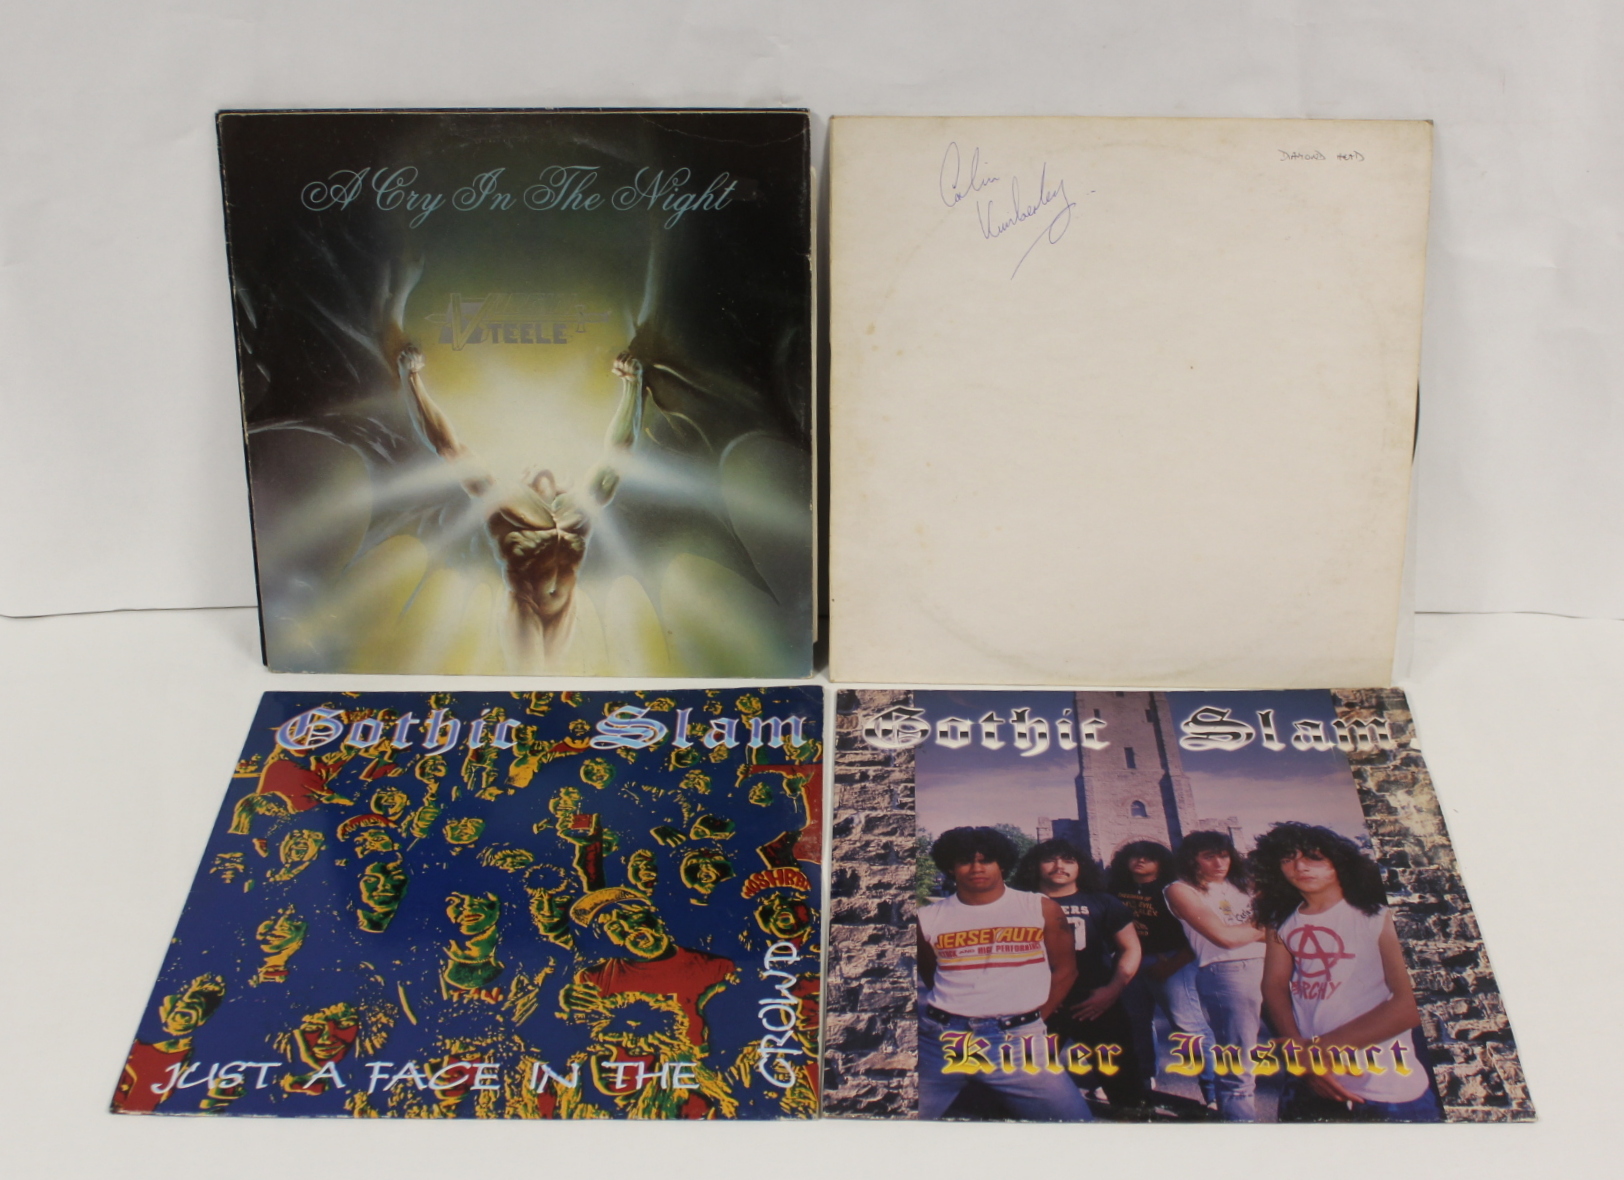 Collection of NWOBHM to include 2 x Gothic Slam and a Diamond Head white label LP 'Lighting To The